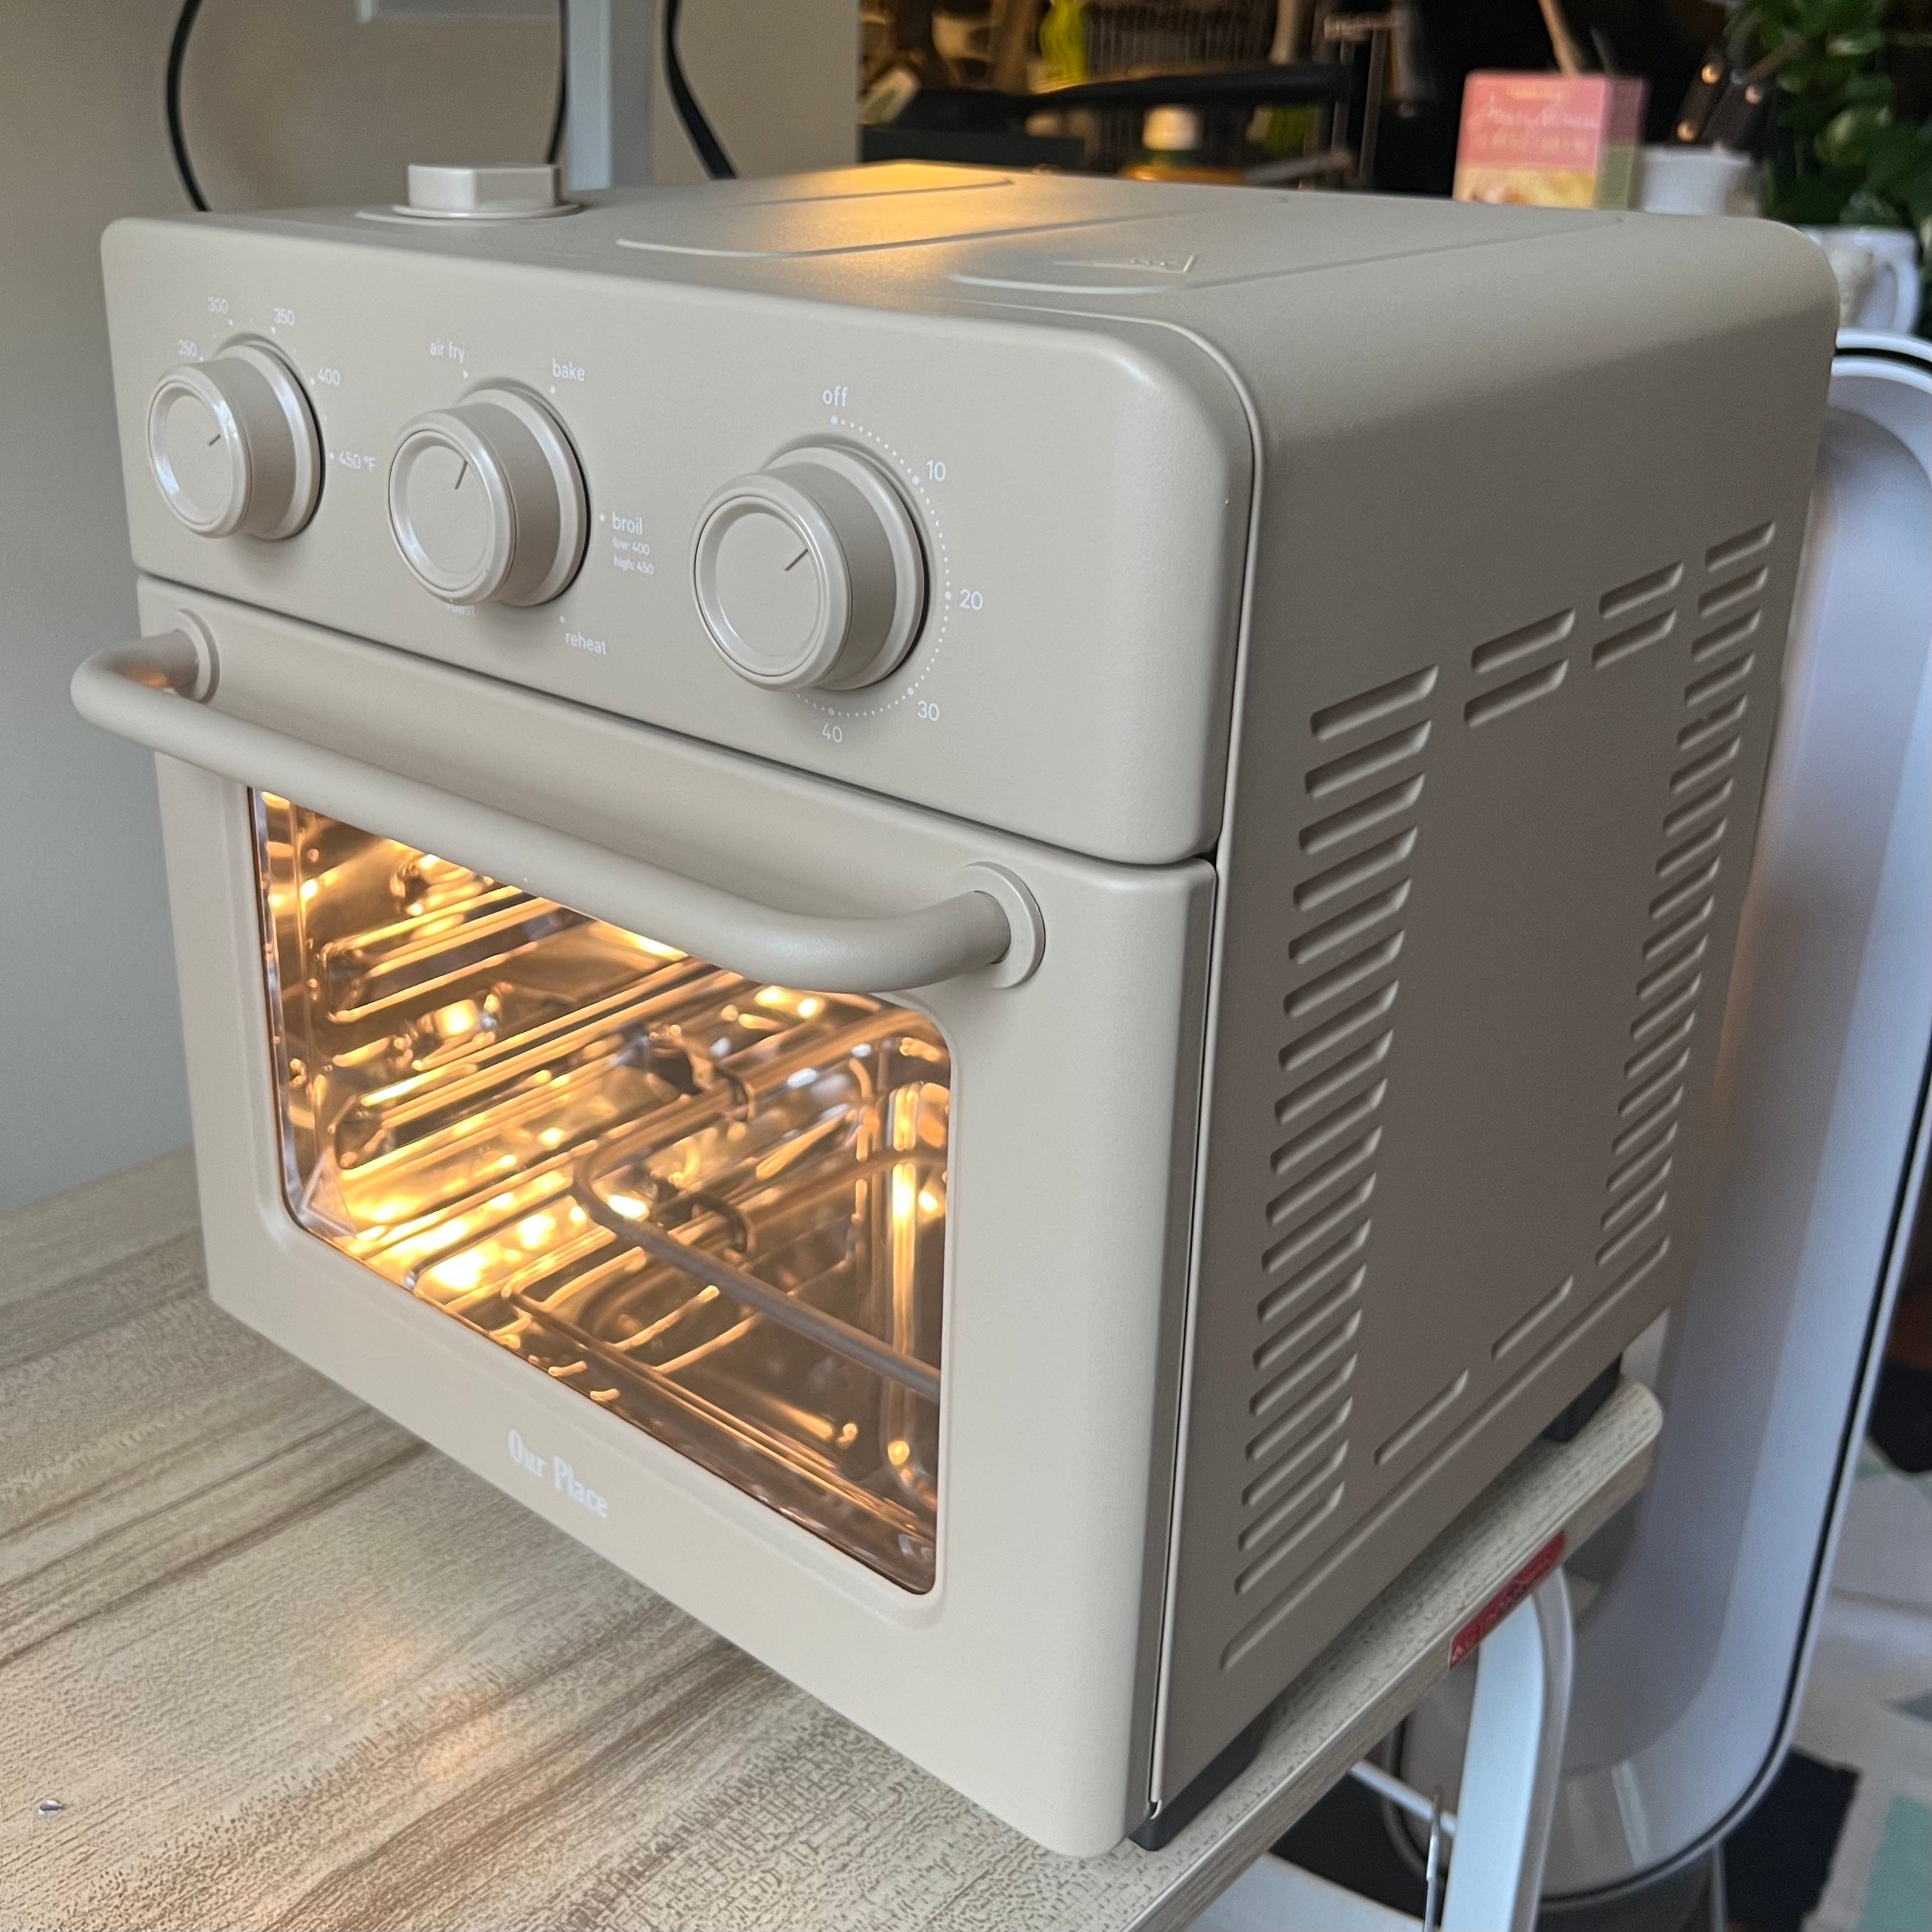 Our Place's Wonder Oven Is Back In Stock — And It Now Comes in Sage